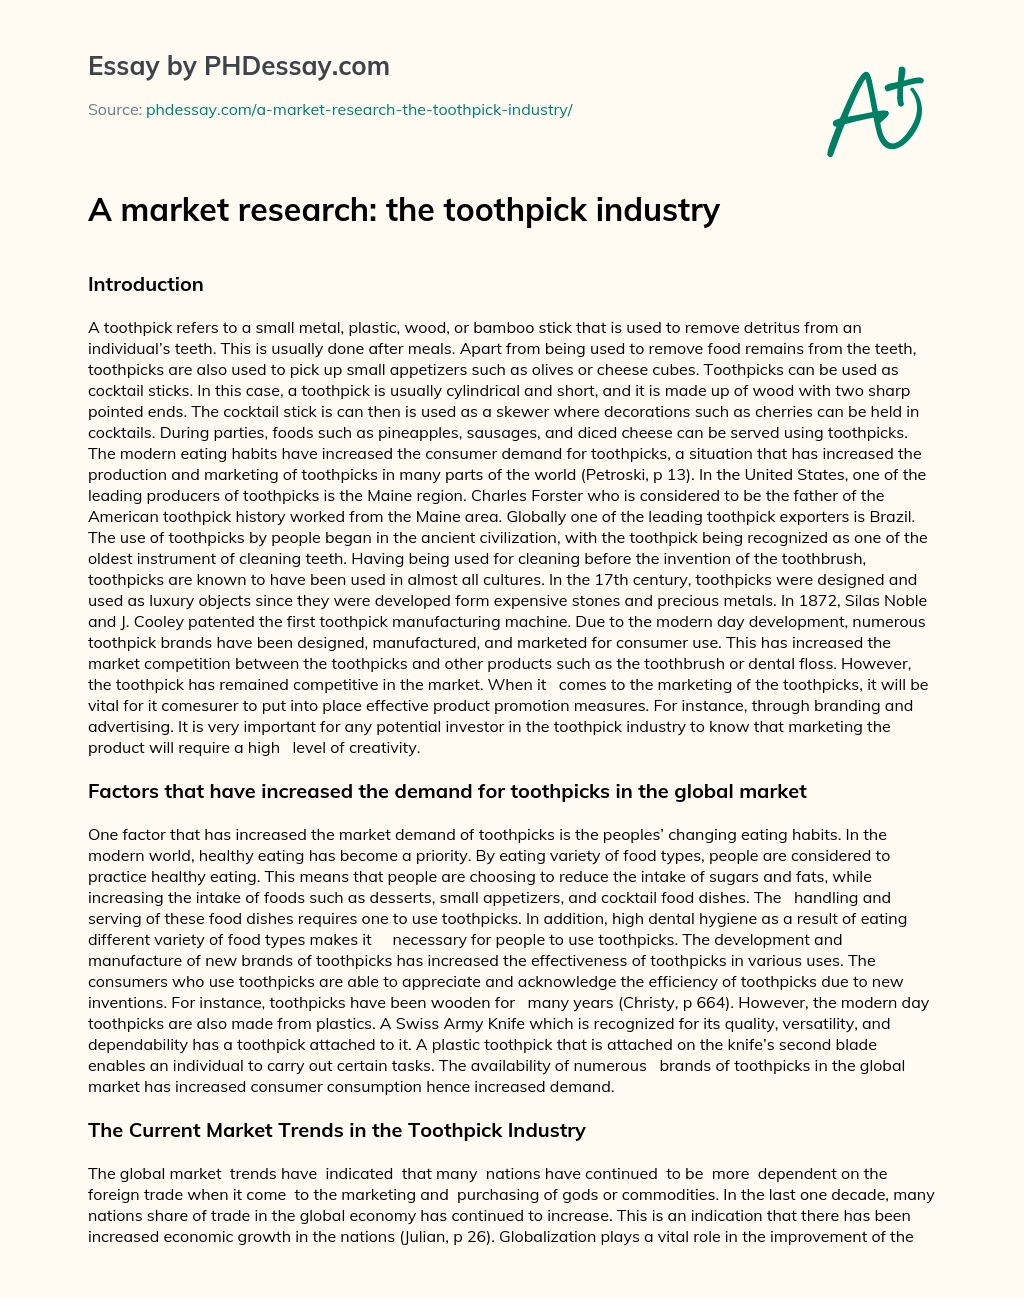 A market research: the toothpick industry essay